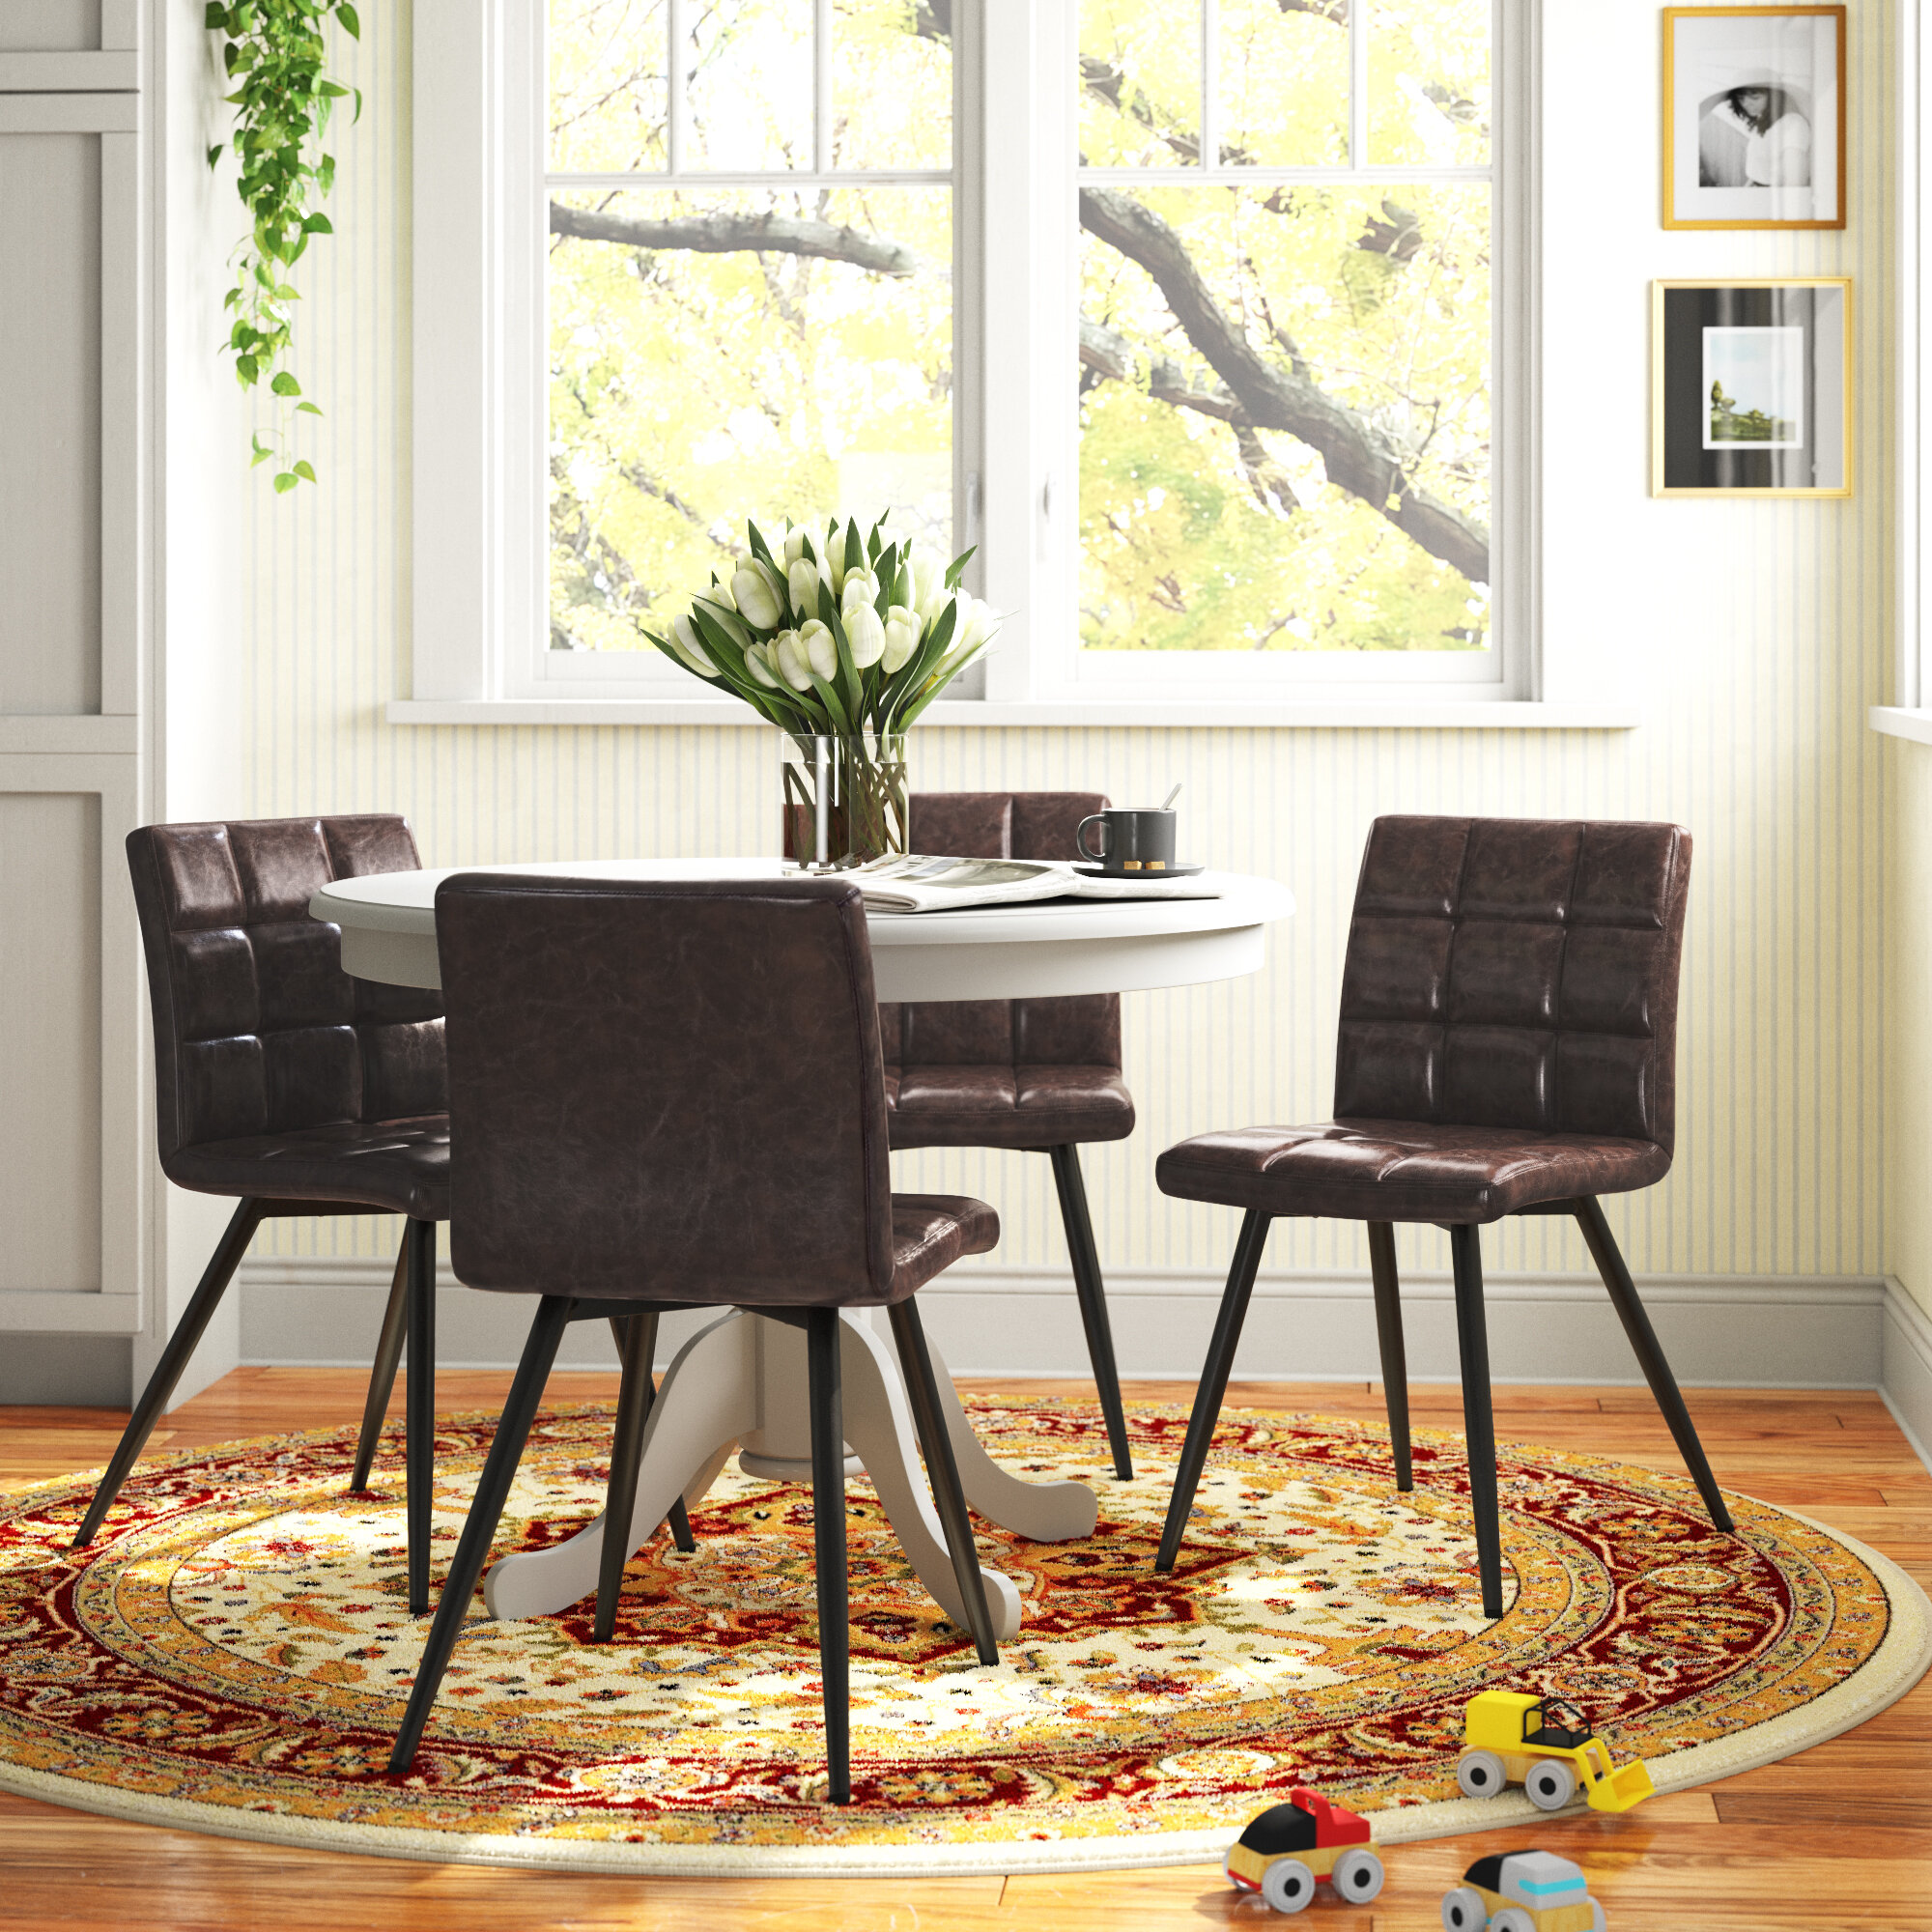 Tusarora Iron King Louis Back Side Chair (Set of 4) Bayou Breeze Leg Color: Black, Upholstery Color: Whiskey Brown